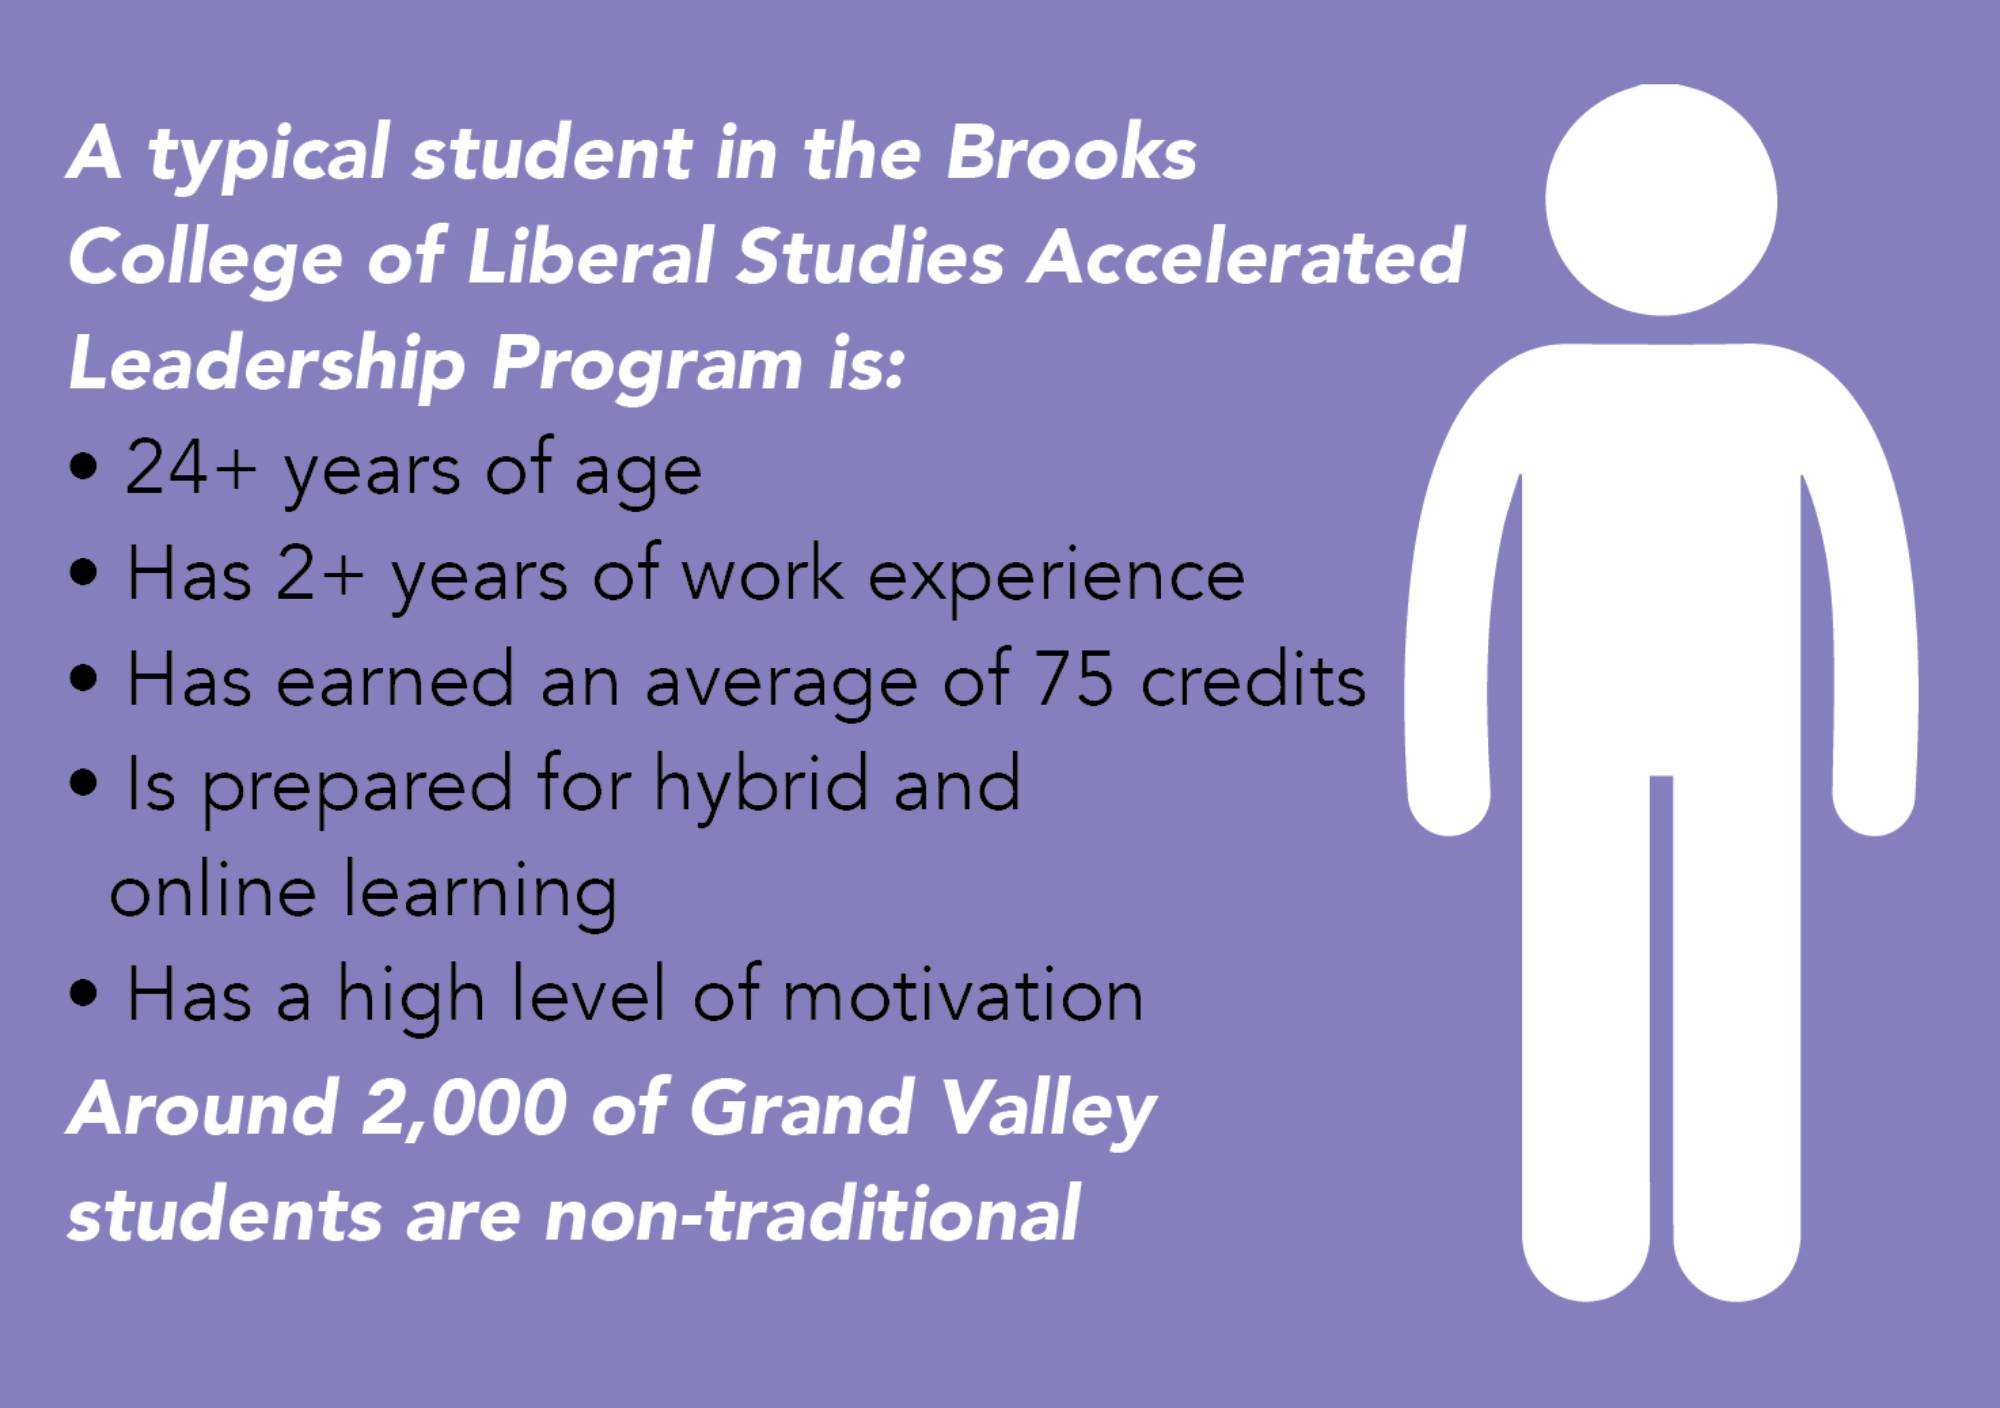 A typical student in the Brooks College of Liberal Studies Accelerated Leadership Program is: 24+ years of age. Has 2+ years of work experience. Has earned an average of 75 credits. Is prepared for hybrid and online learning. Has a high level of motivation Around 2,000 of Grand Valley students are nontraditional